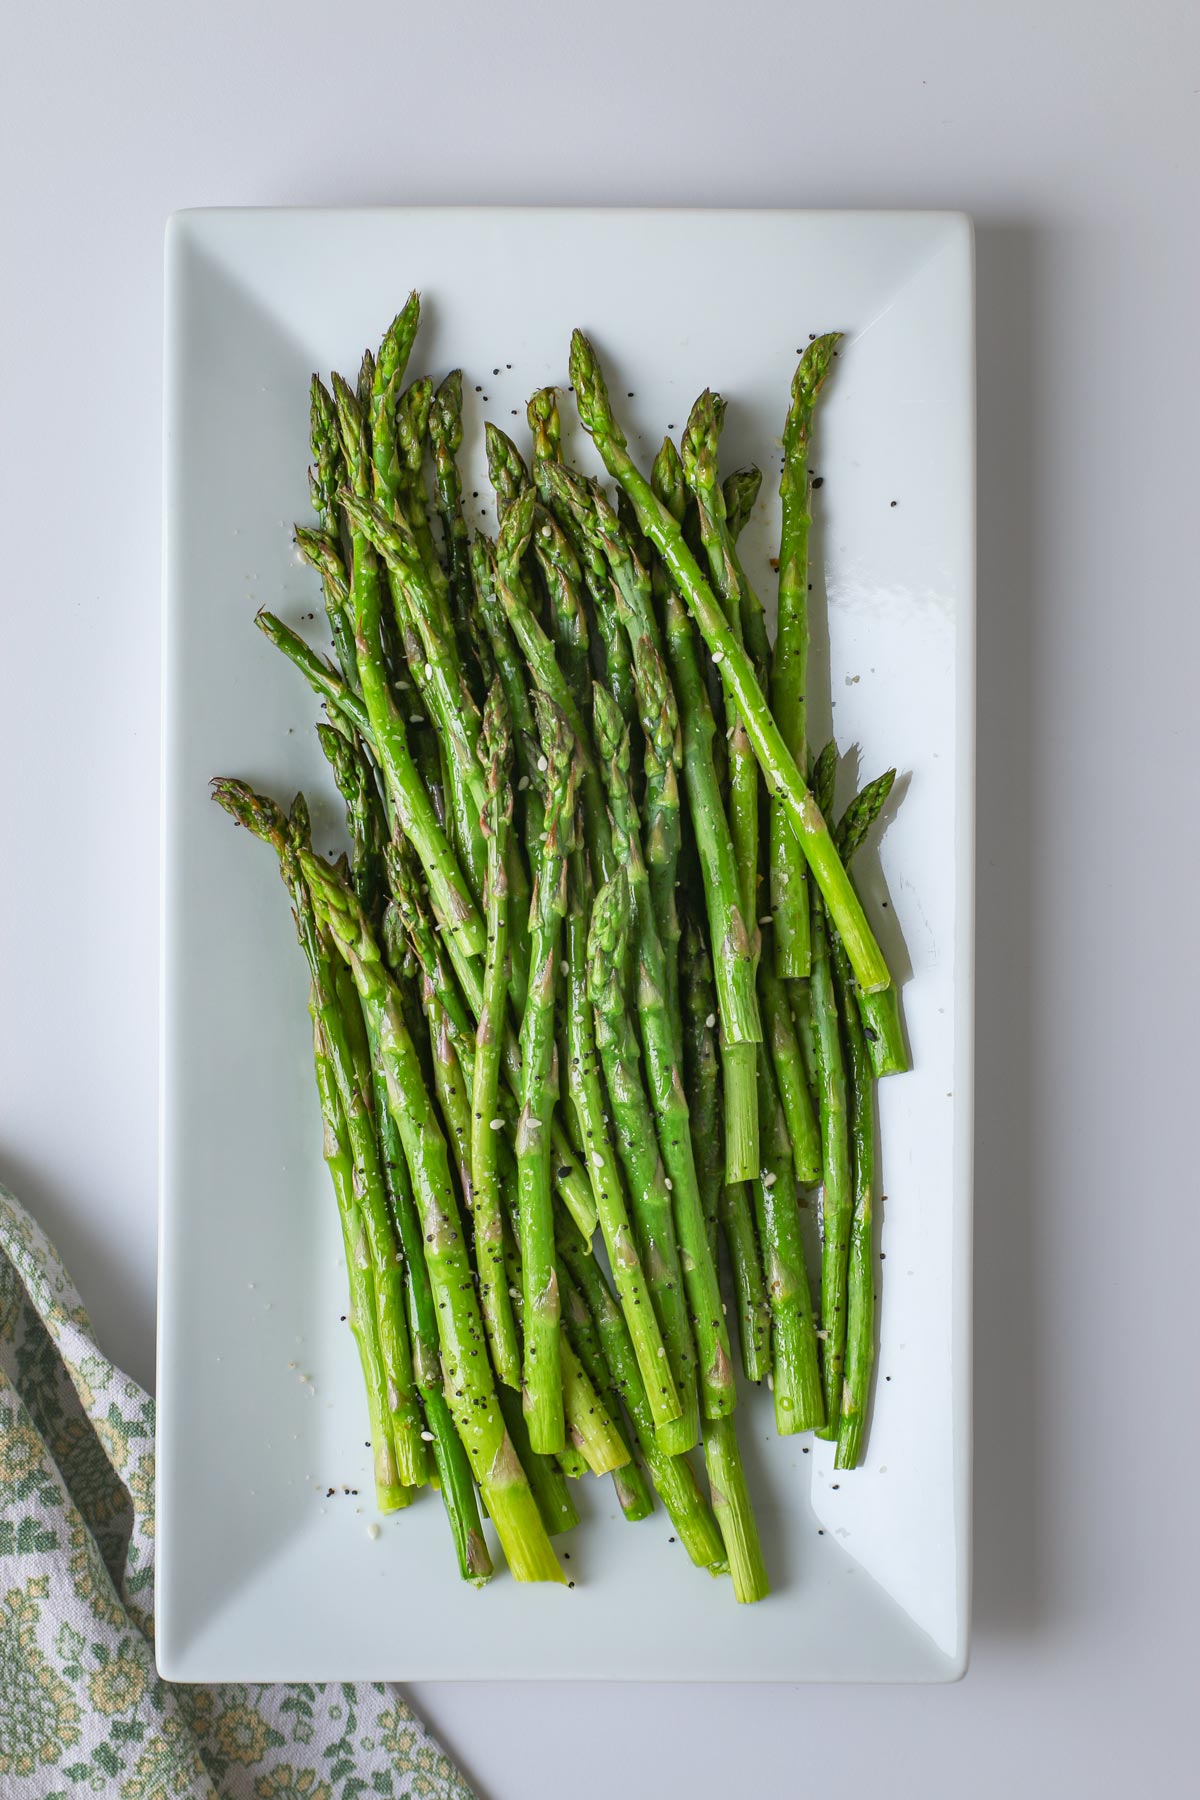 the finished asparagus with Everything seasoning on a rectangular platter.